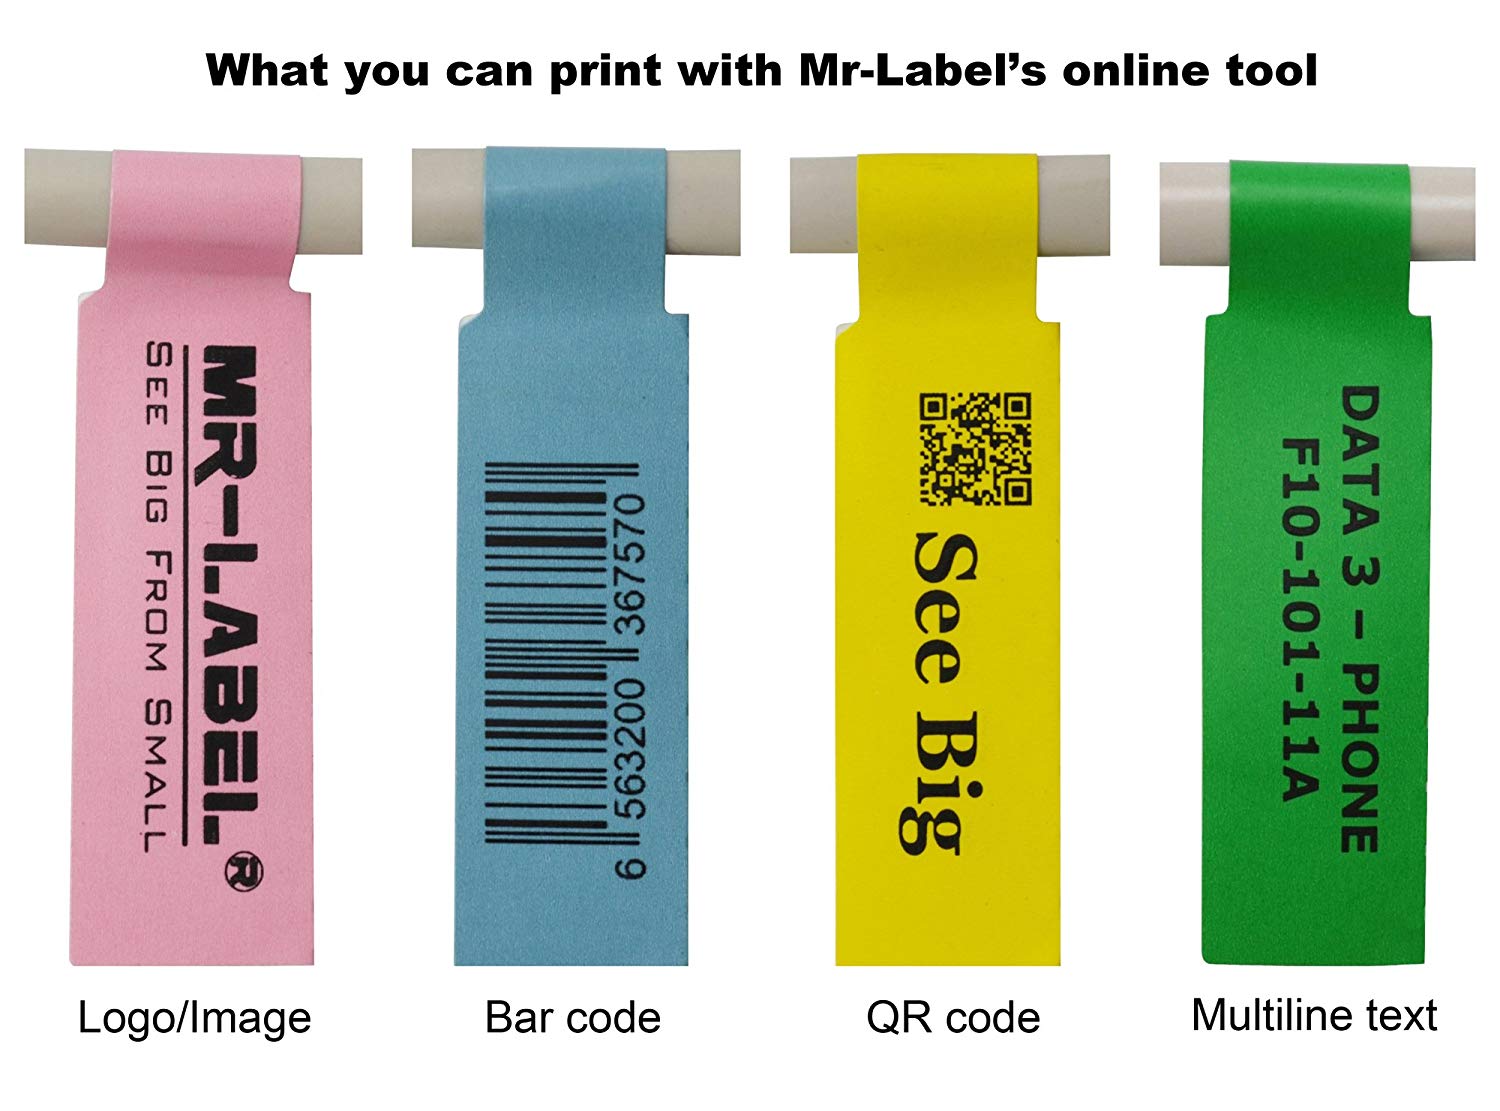 mr-label-self-adhesive-cable-label-a4-sheet-waterproof-tear